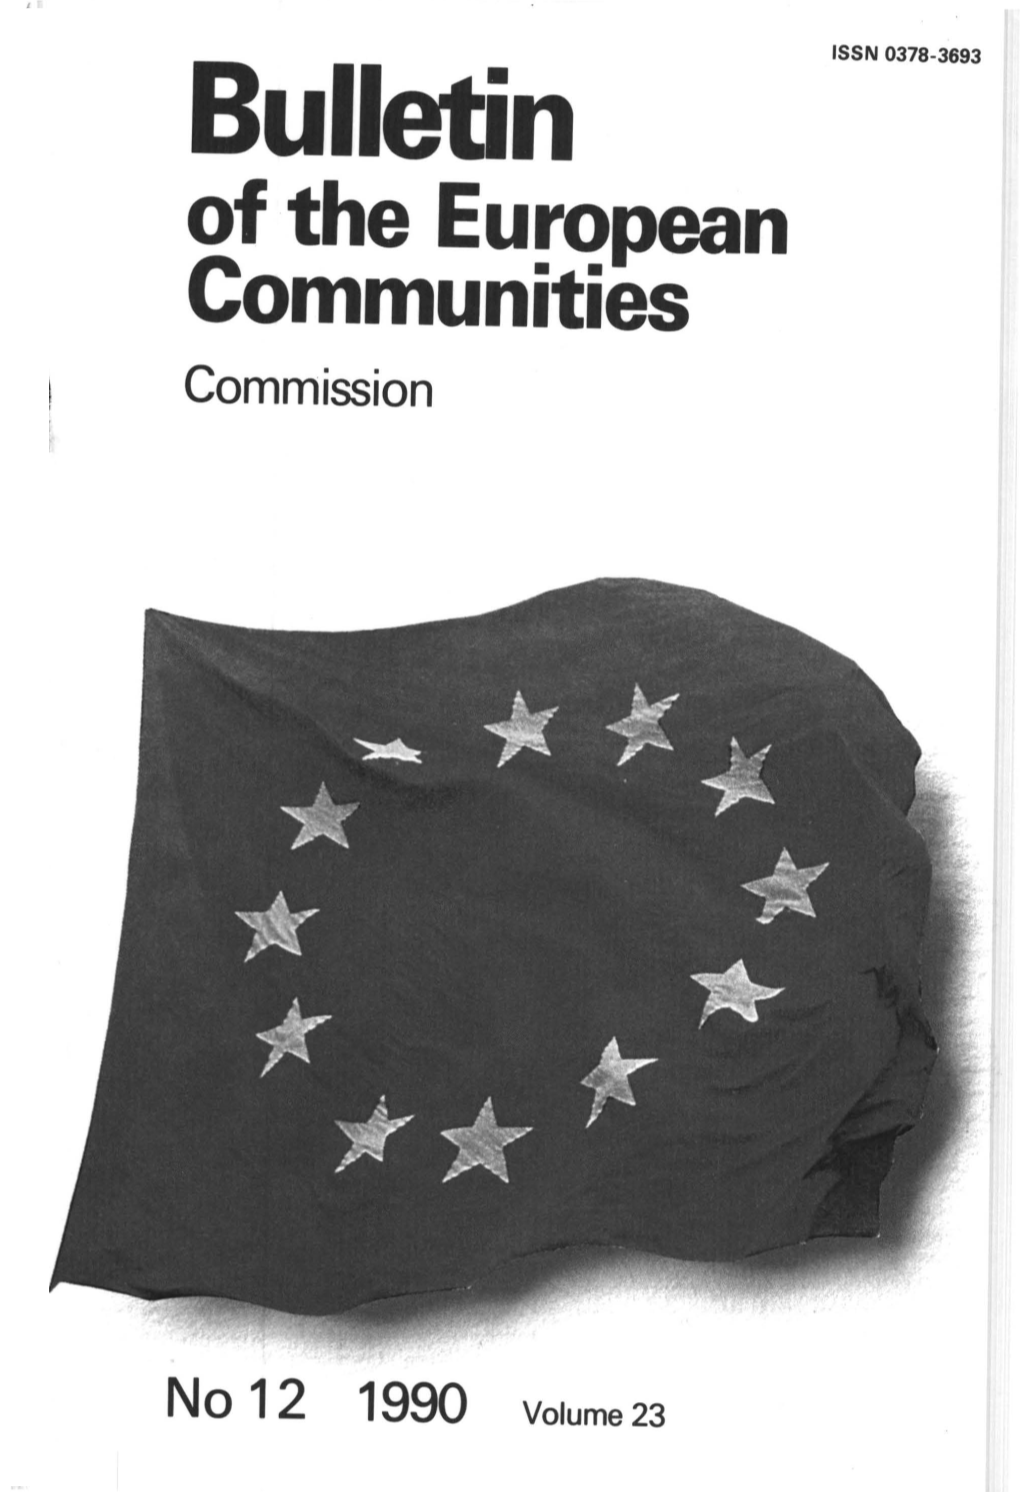 Bulletin ISSN 0378-3693 of the European Communities Commission